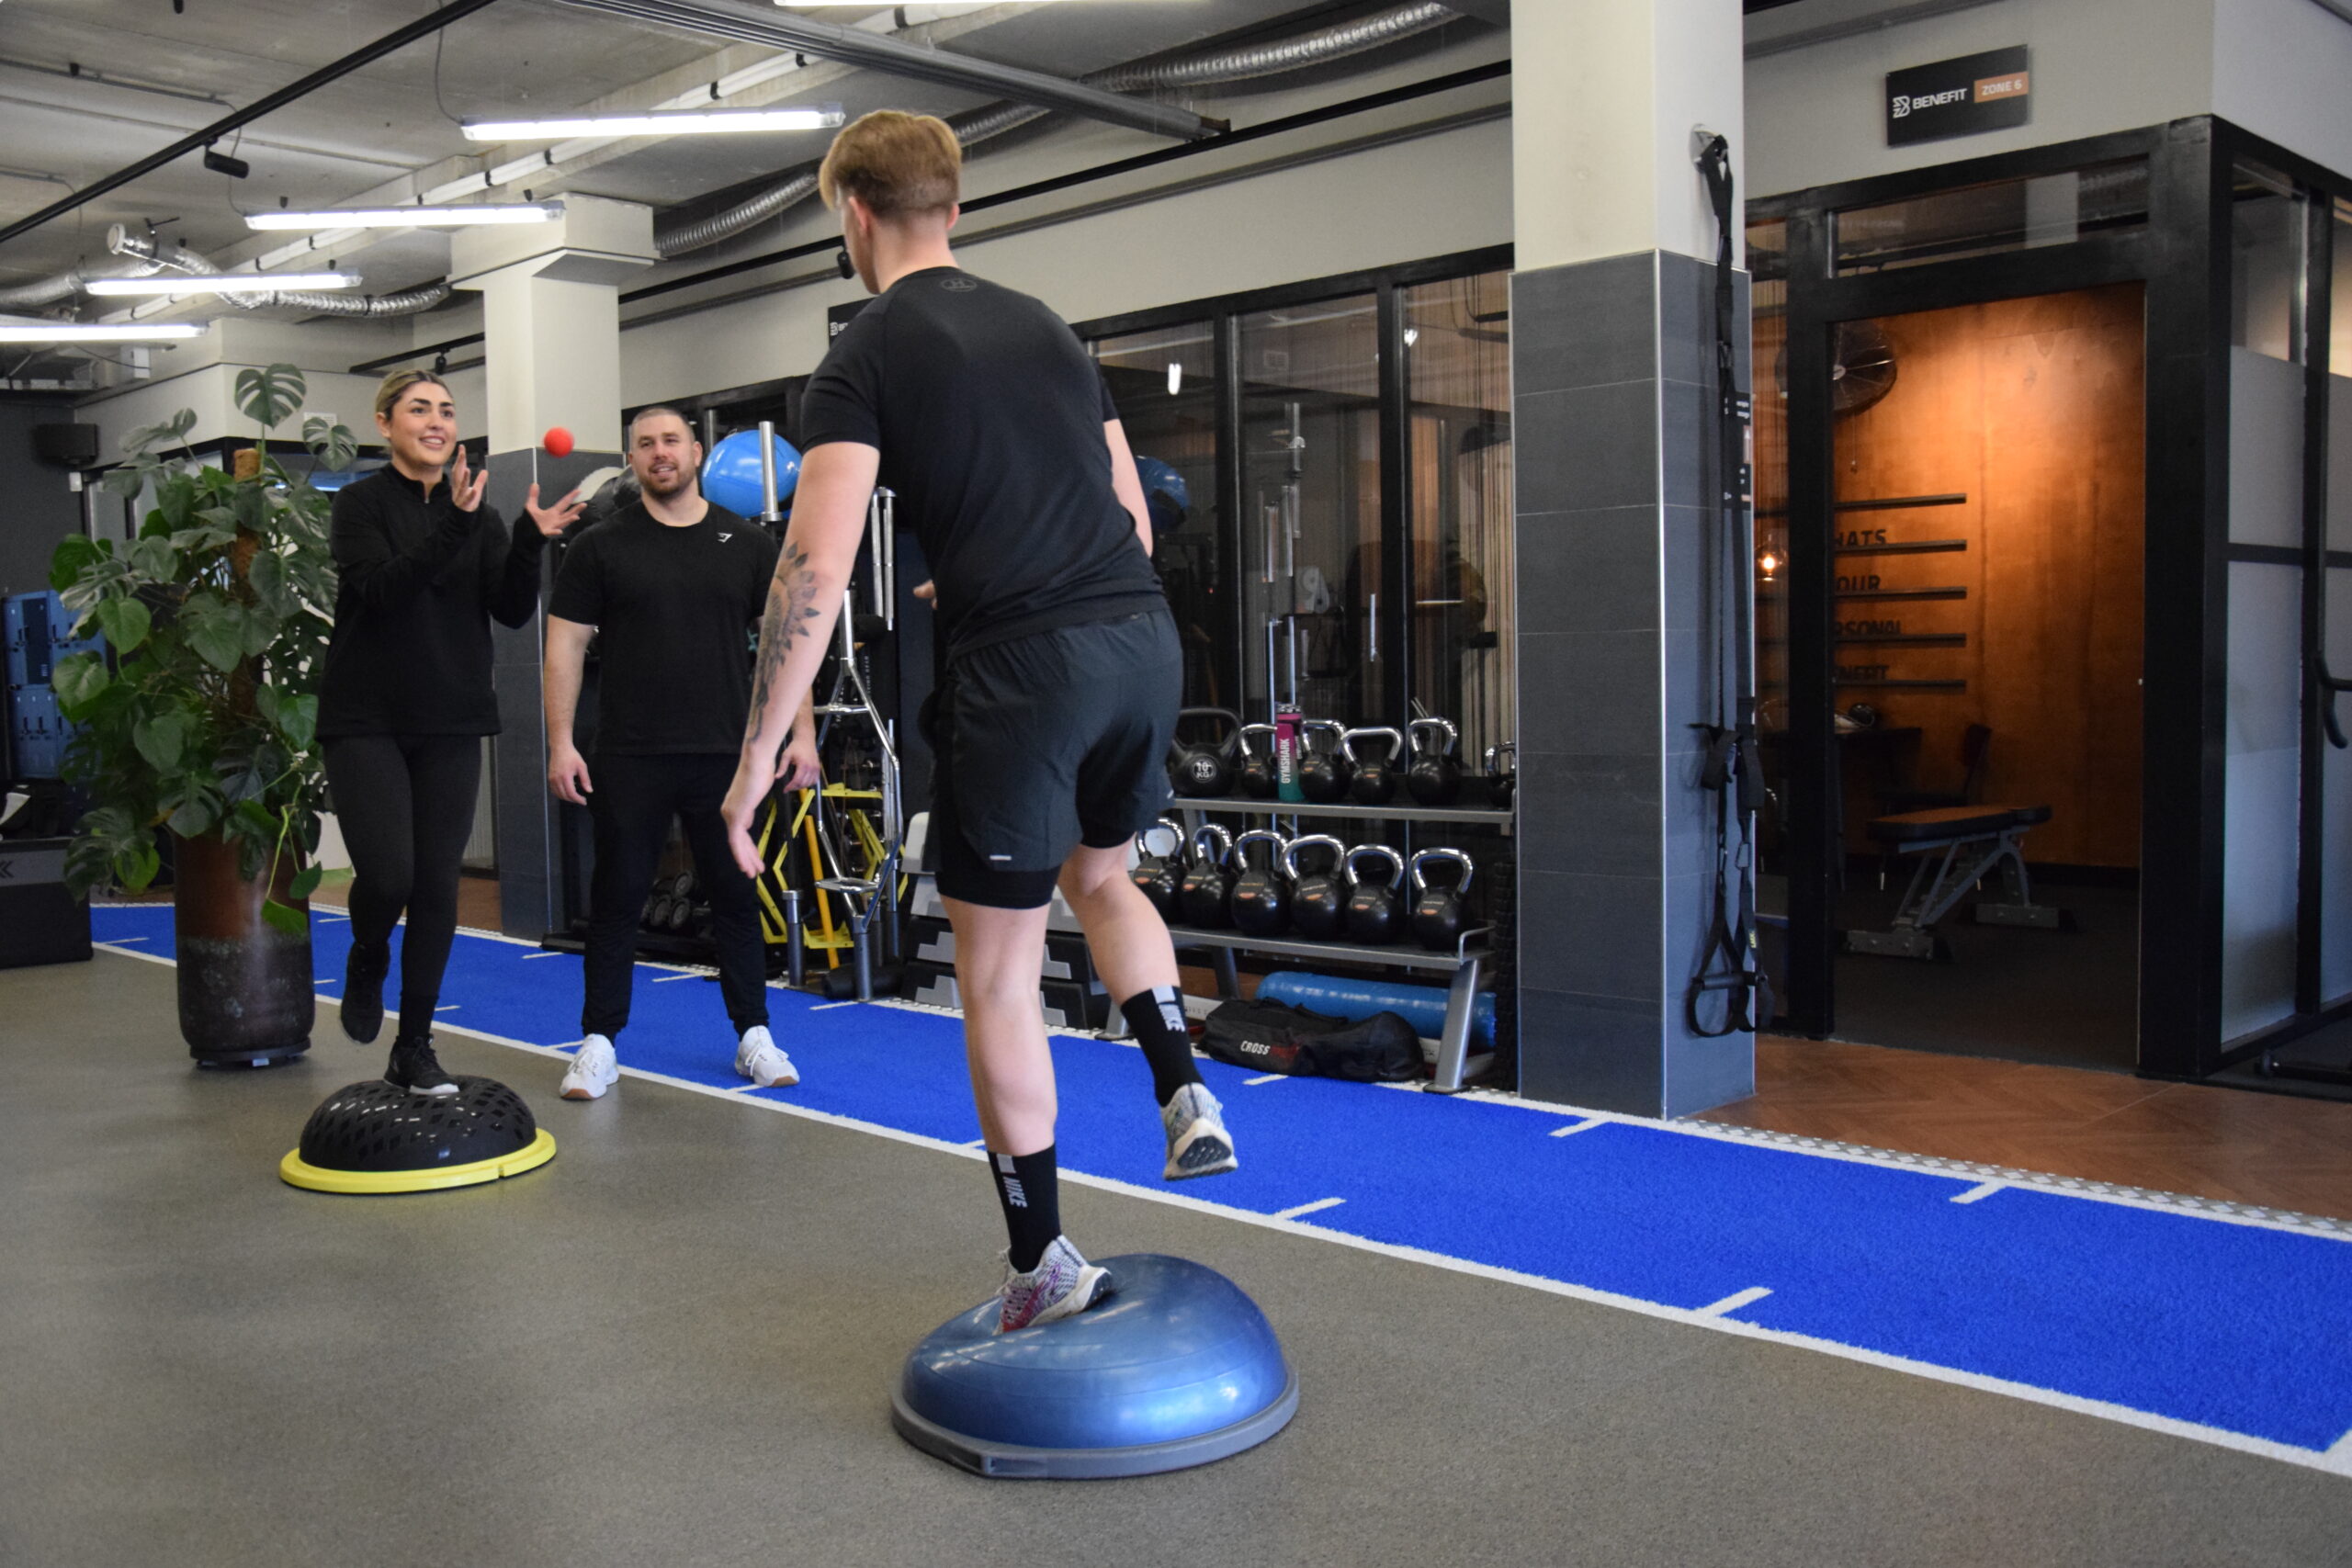 Trainer/coach is giving cues while performing stability exercises mixed with coordination during a duo pt session